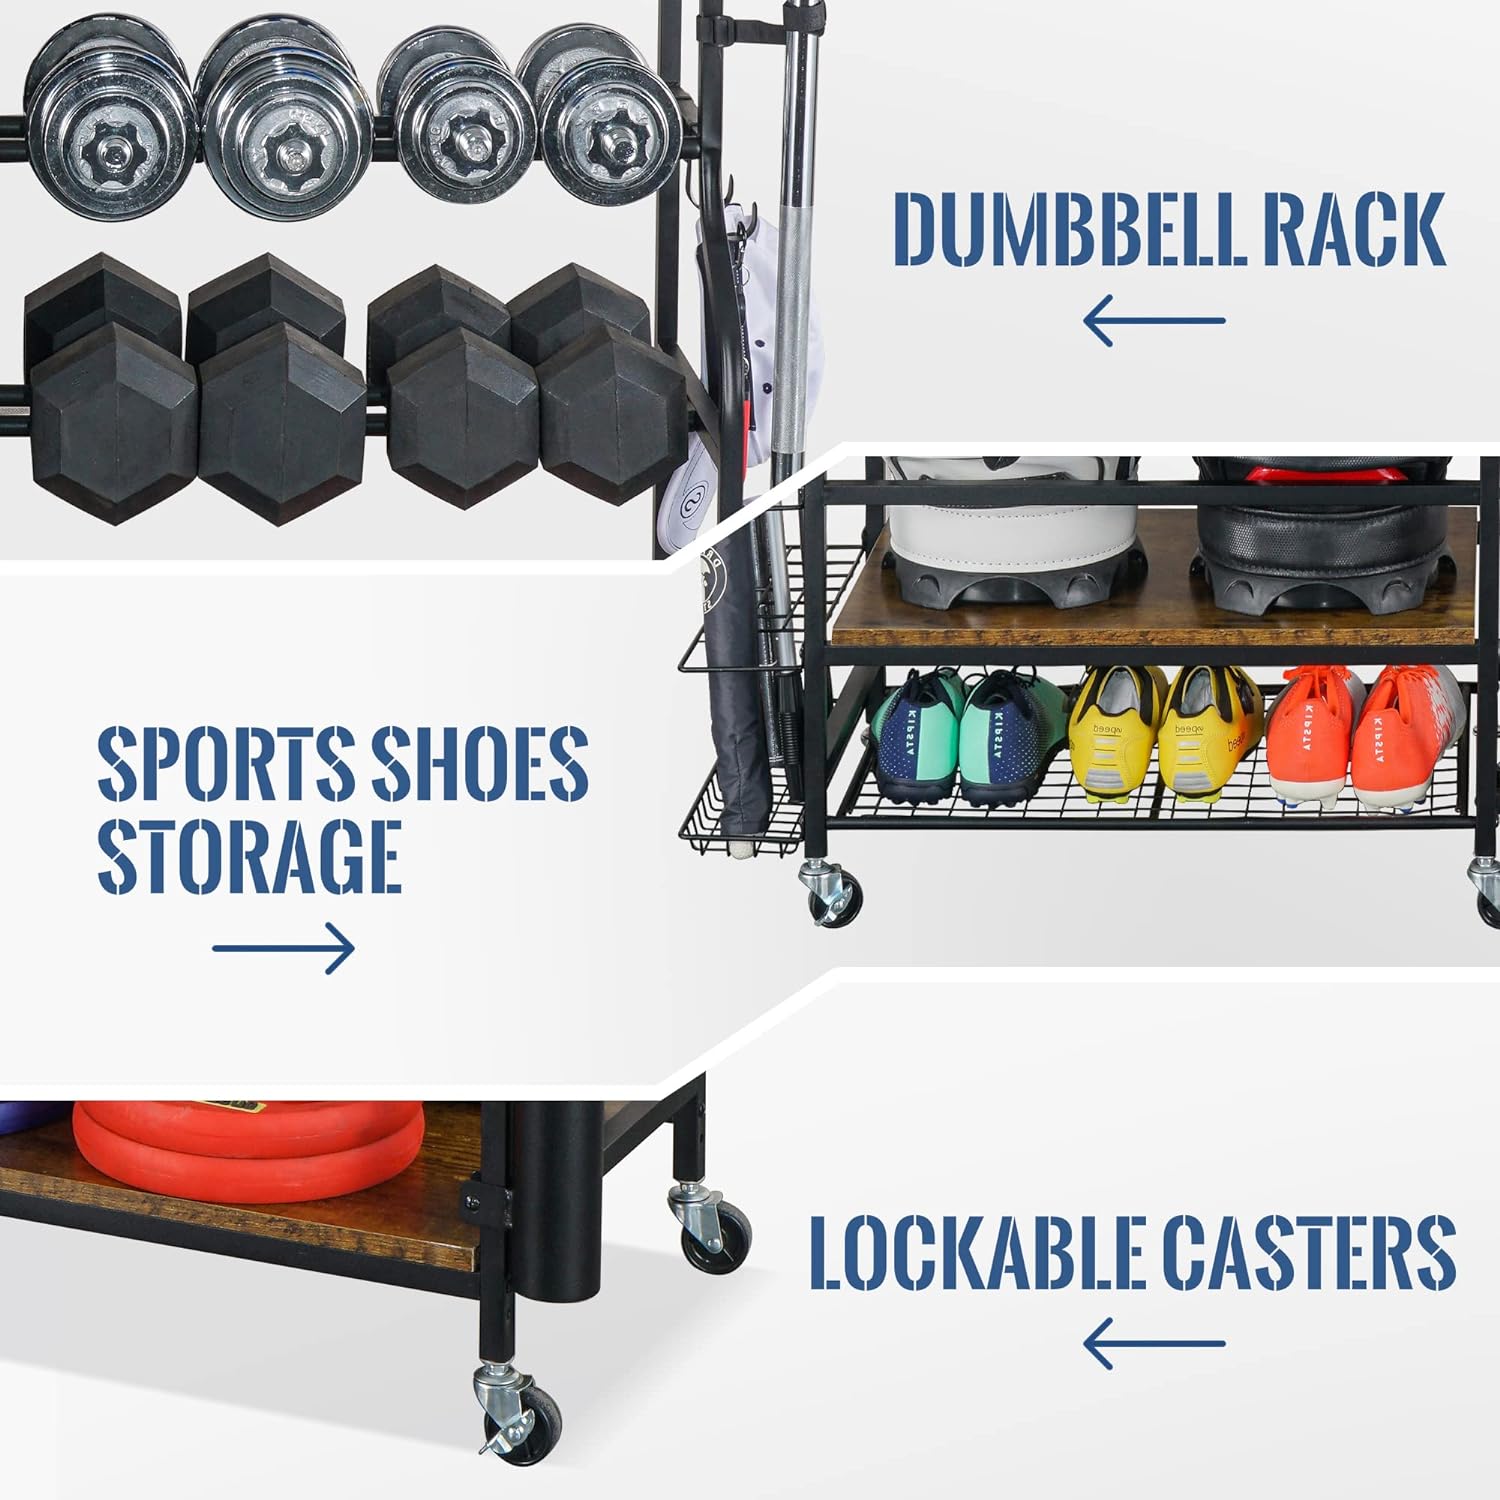 Mythinglogic Weight Rack for Dumbbells, Yoga Mat, Kettlebells and Strength Training Equipmen with Wheels and Hanging Hooks